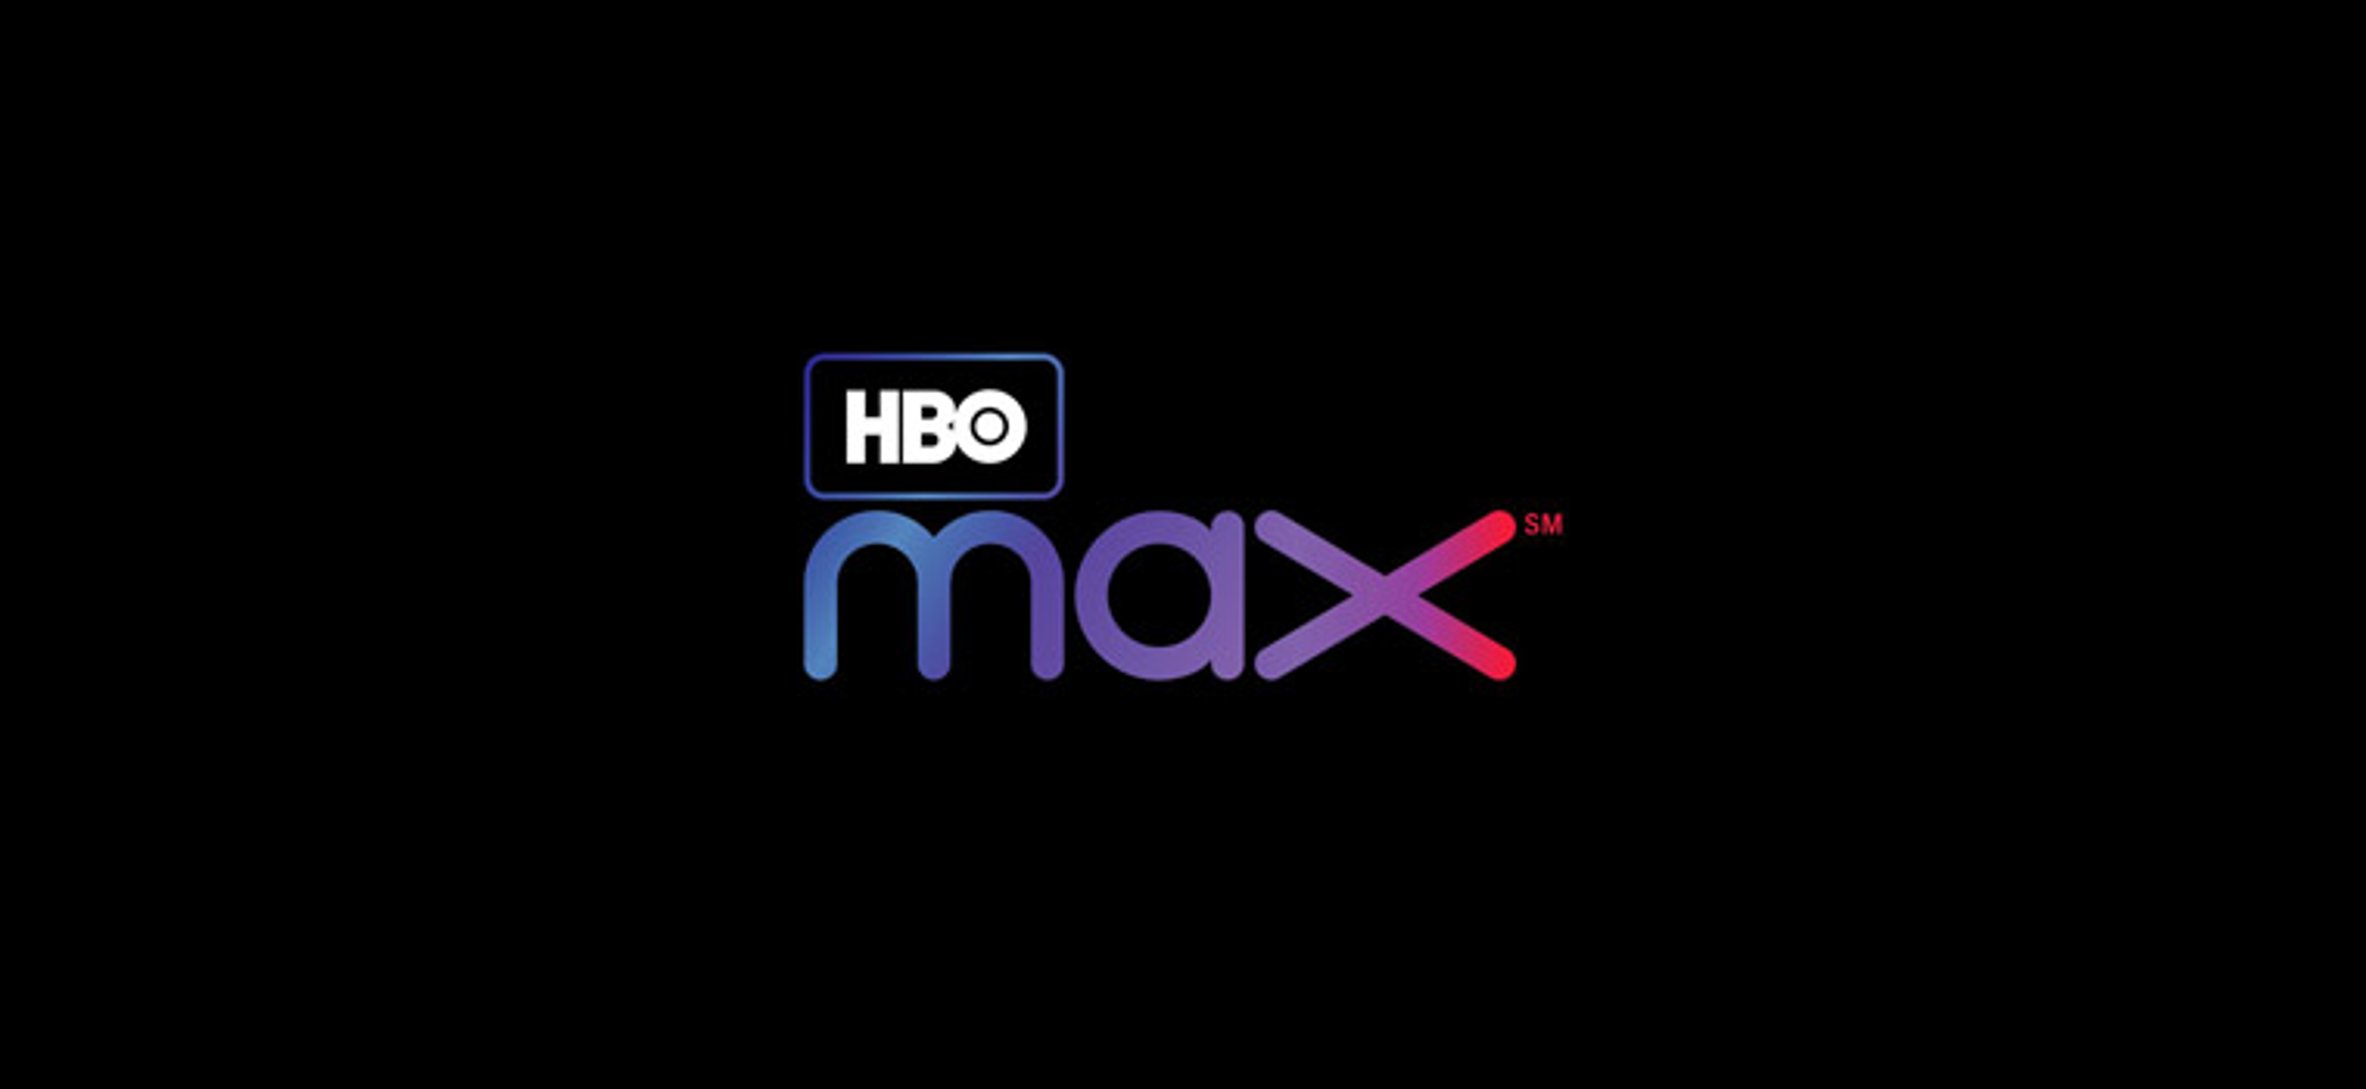 Casting Call for HBO MAX Series “Legendary”